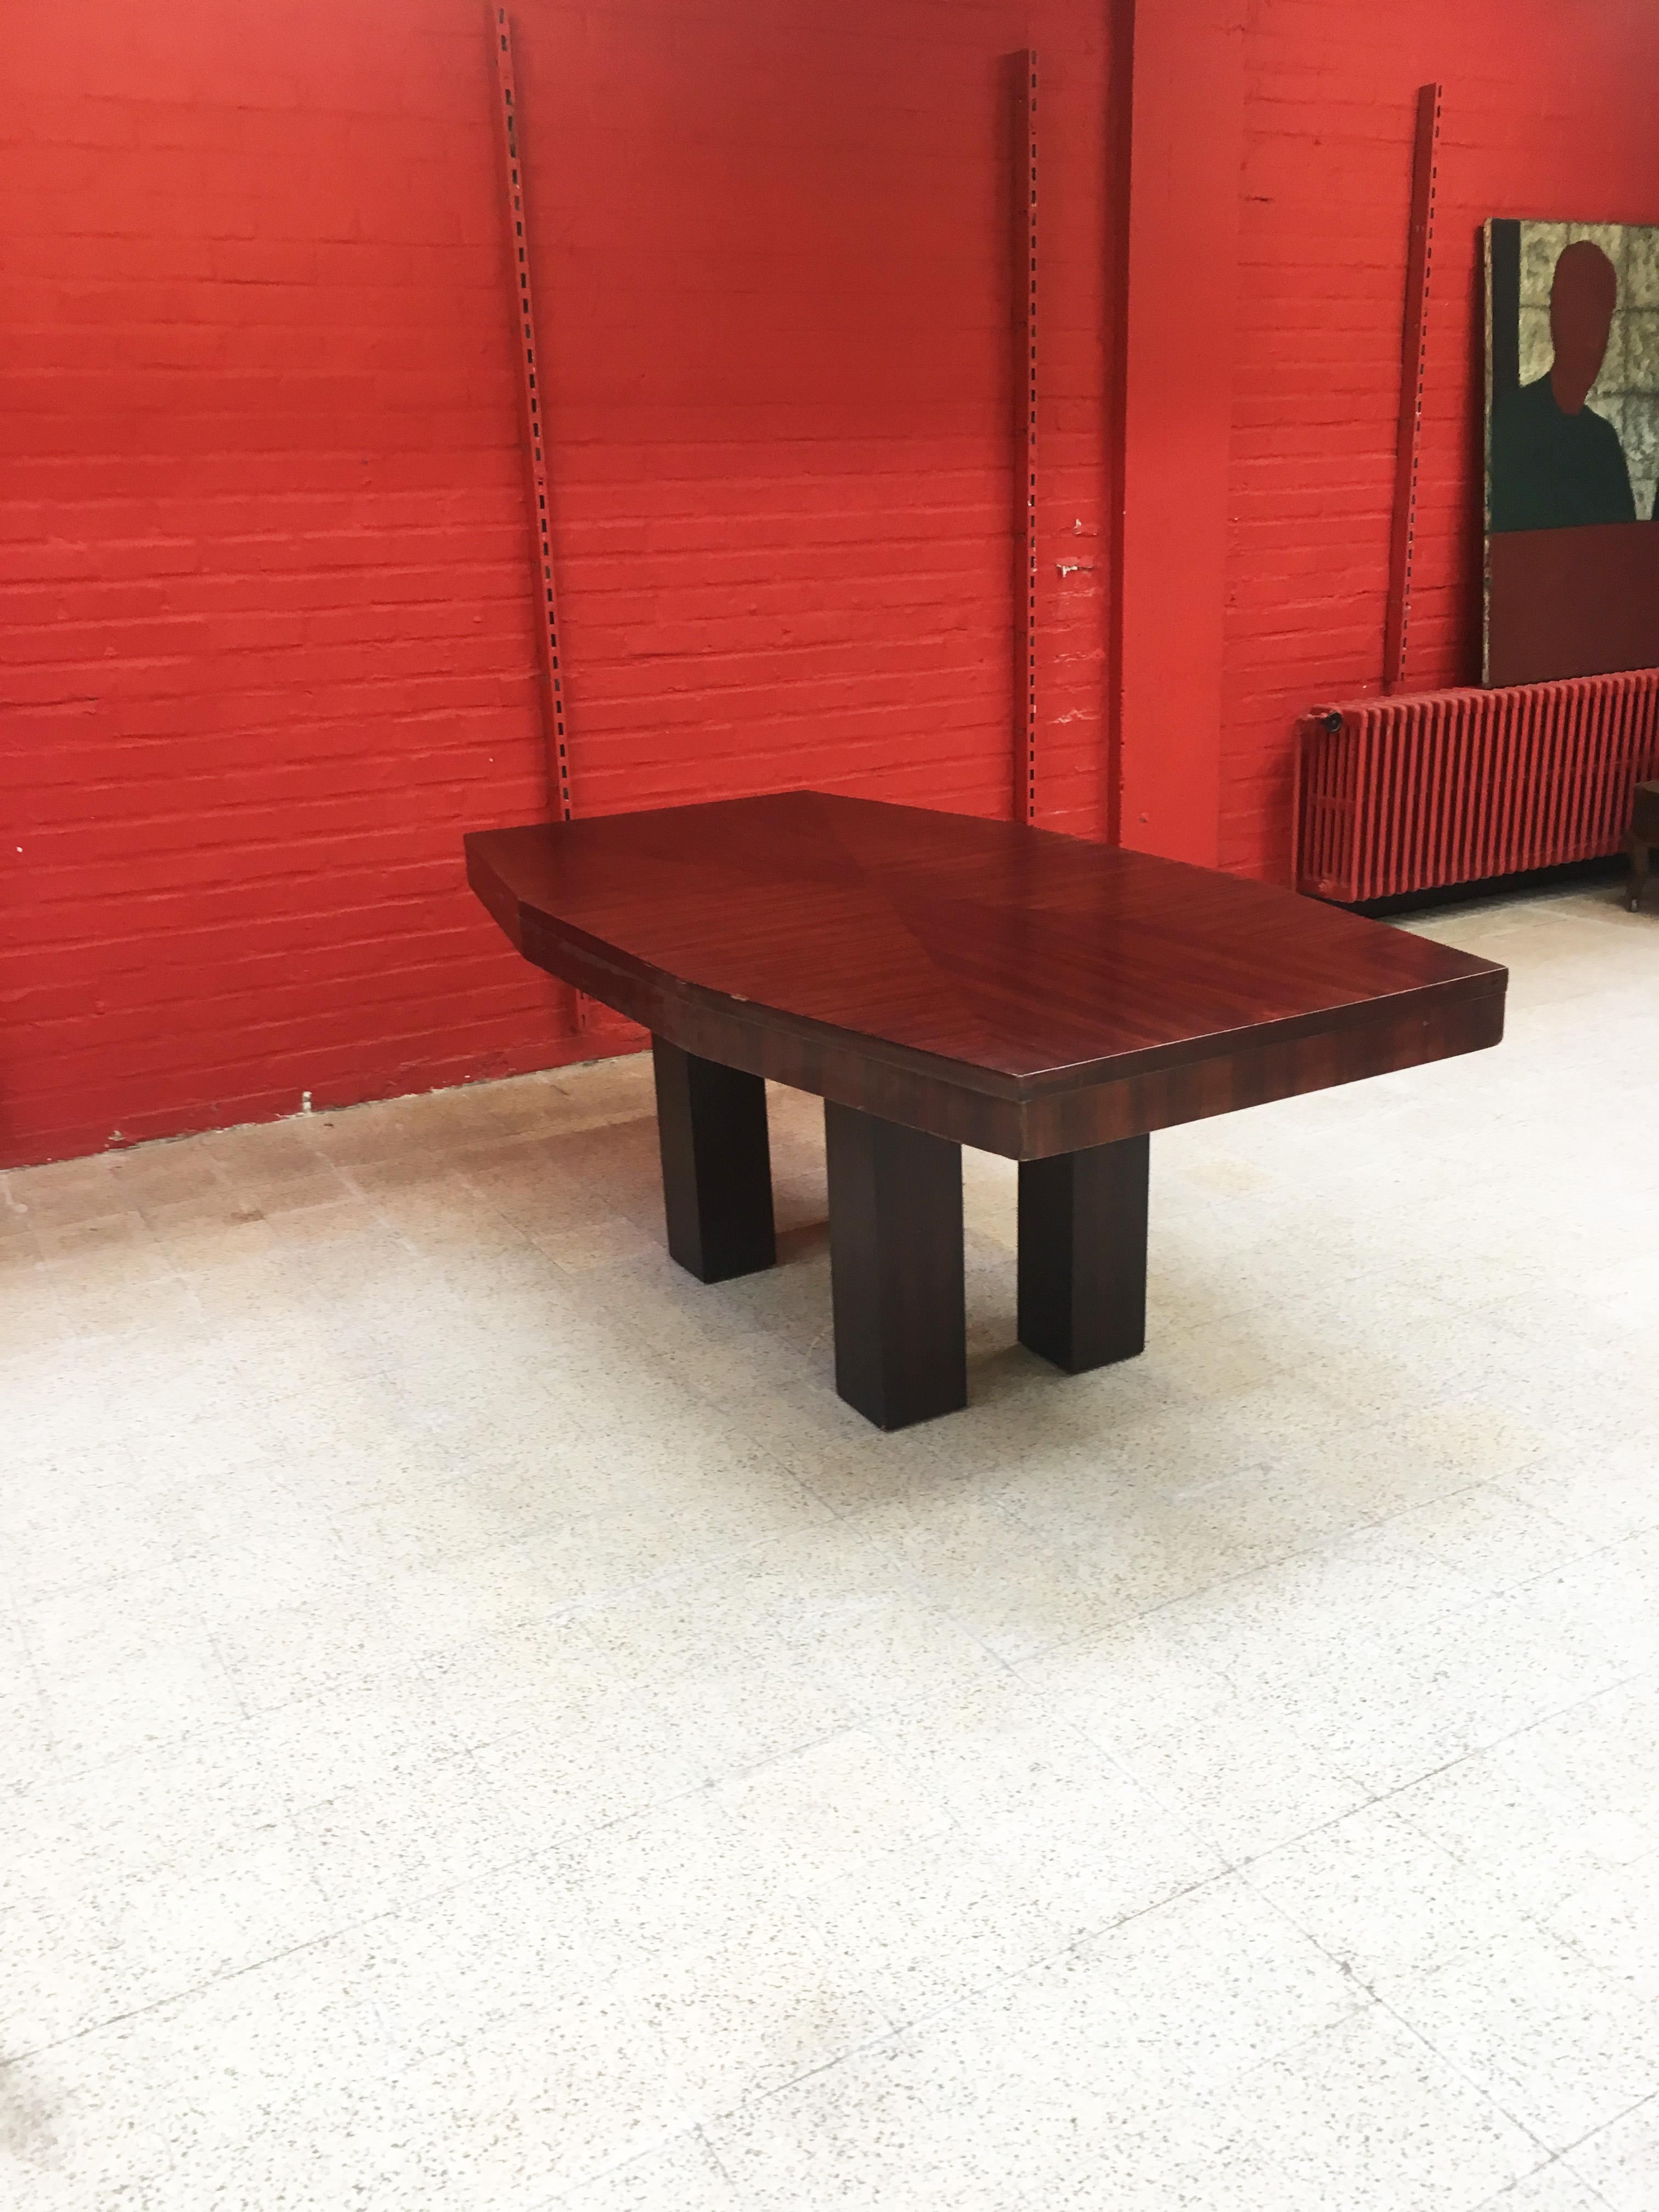 Modernist Art Deco table circa 1930-1940 attributed to Jacques Adnet.